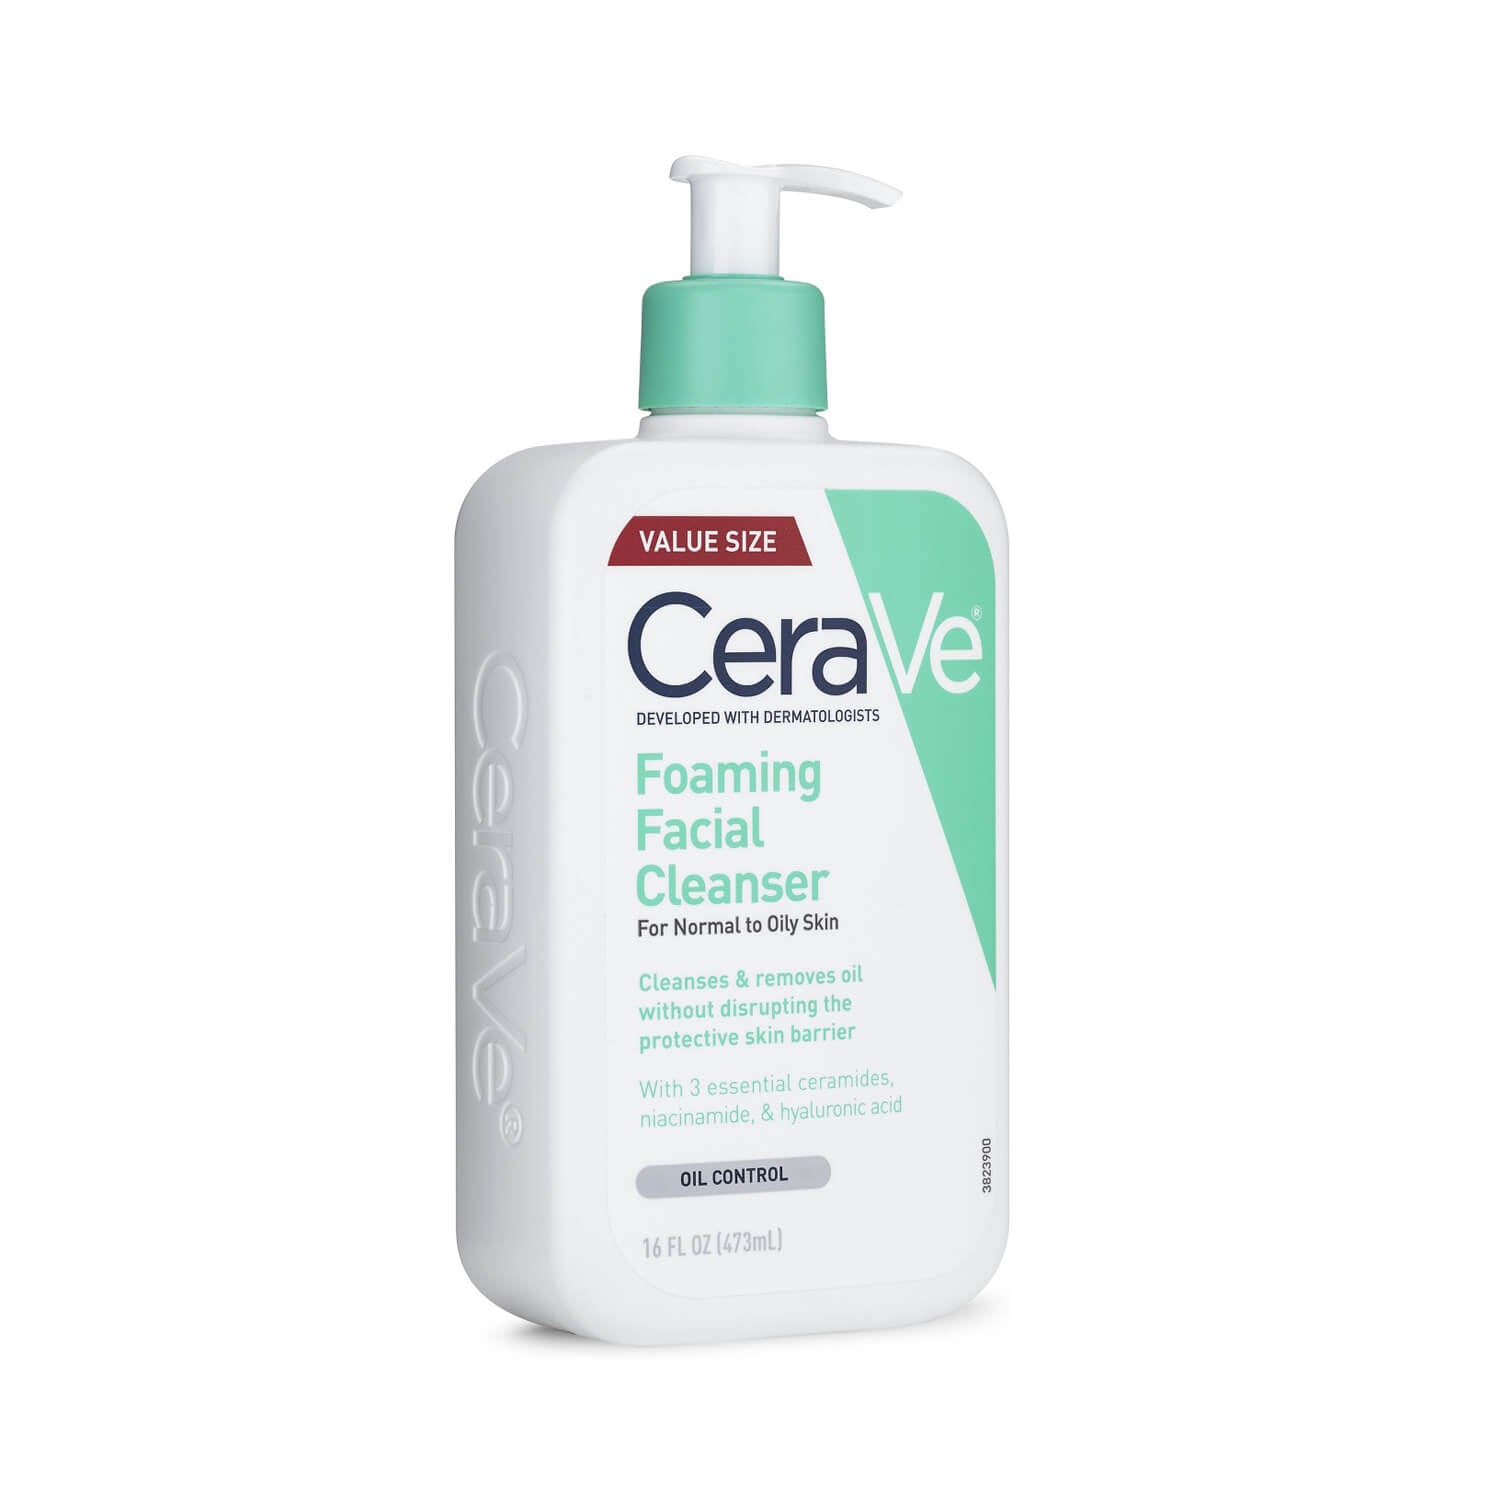 NEW CeraVe - Foaming Facial Cleanser - Value Size - 473ml | eBay